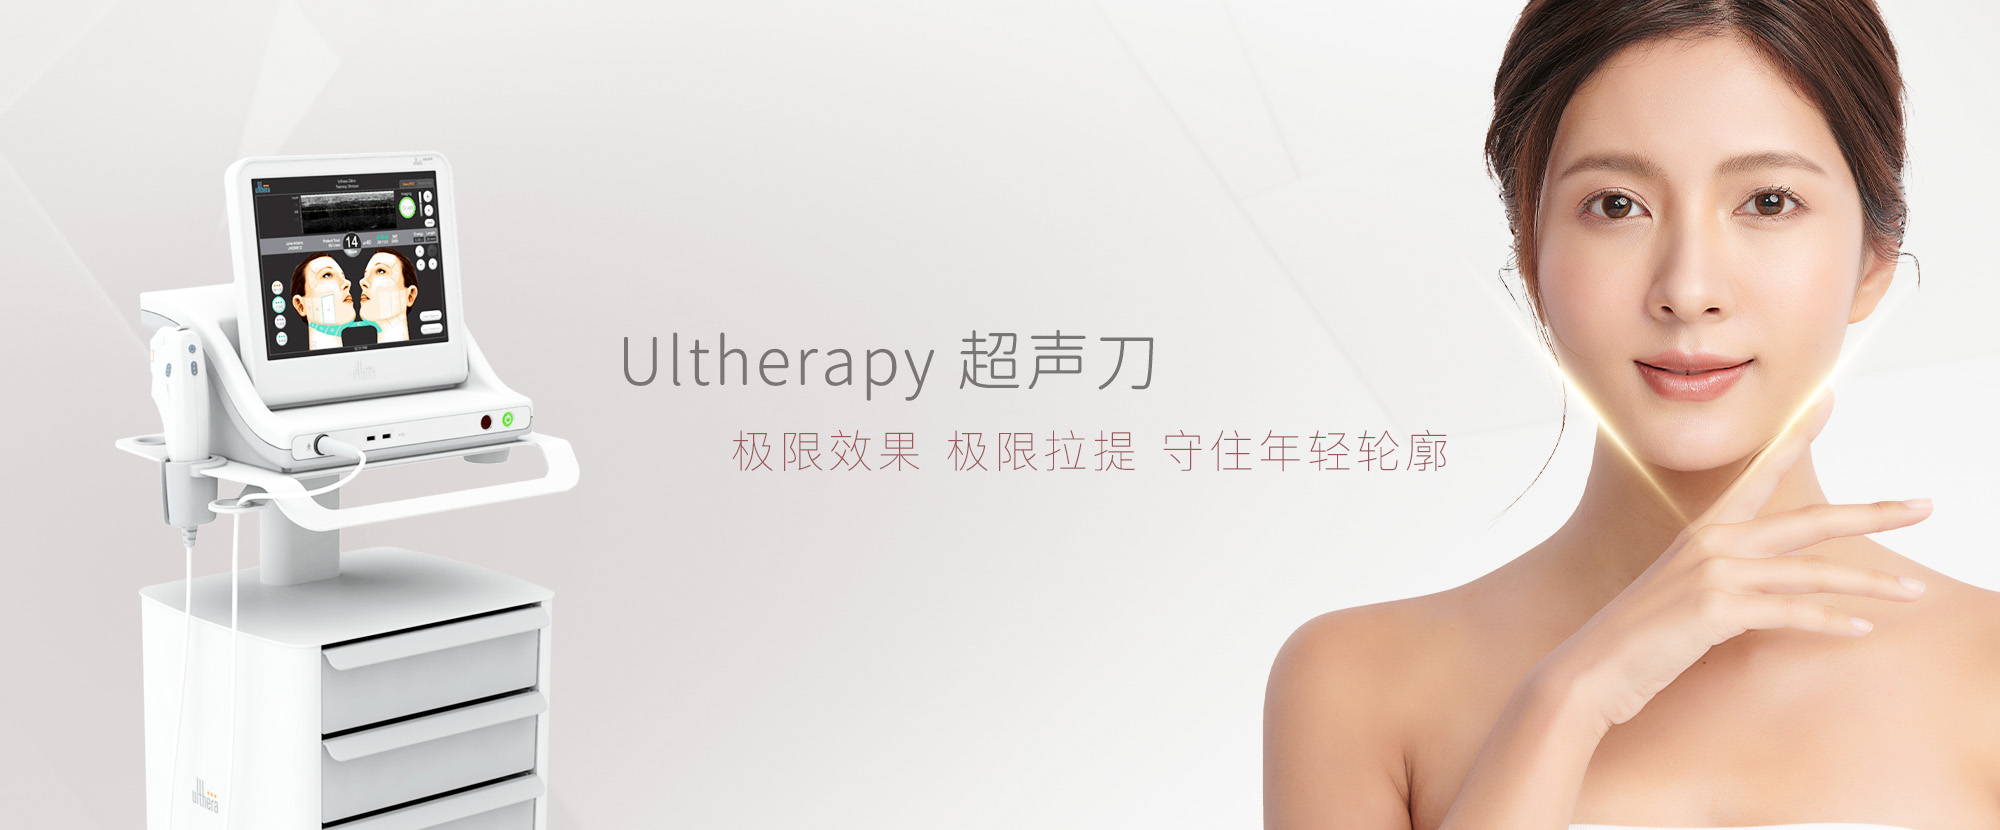 ultherapy banner